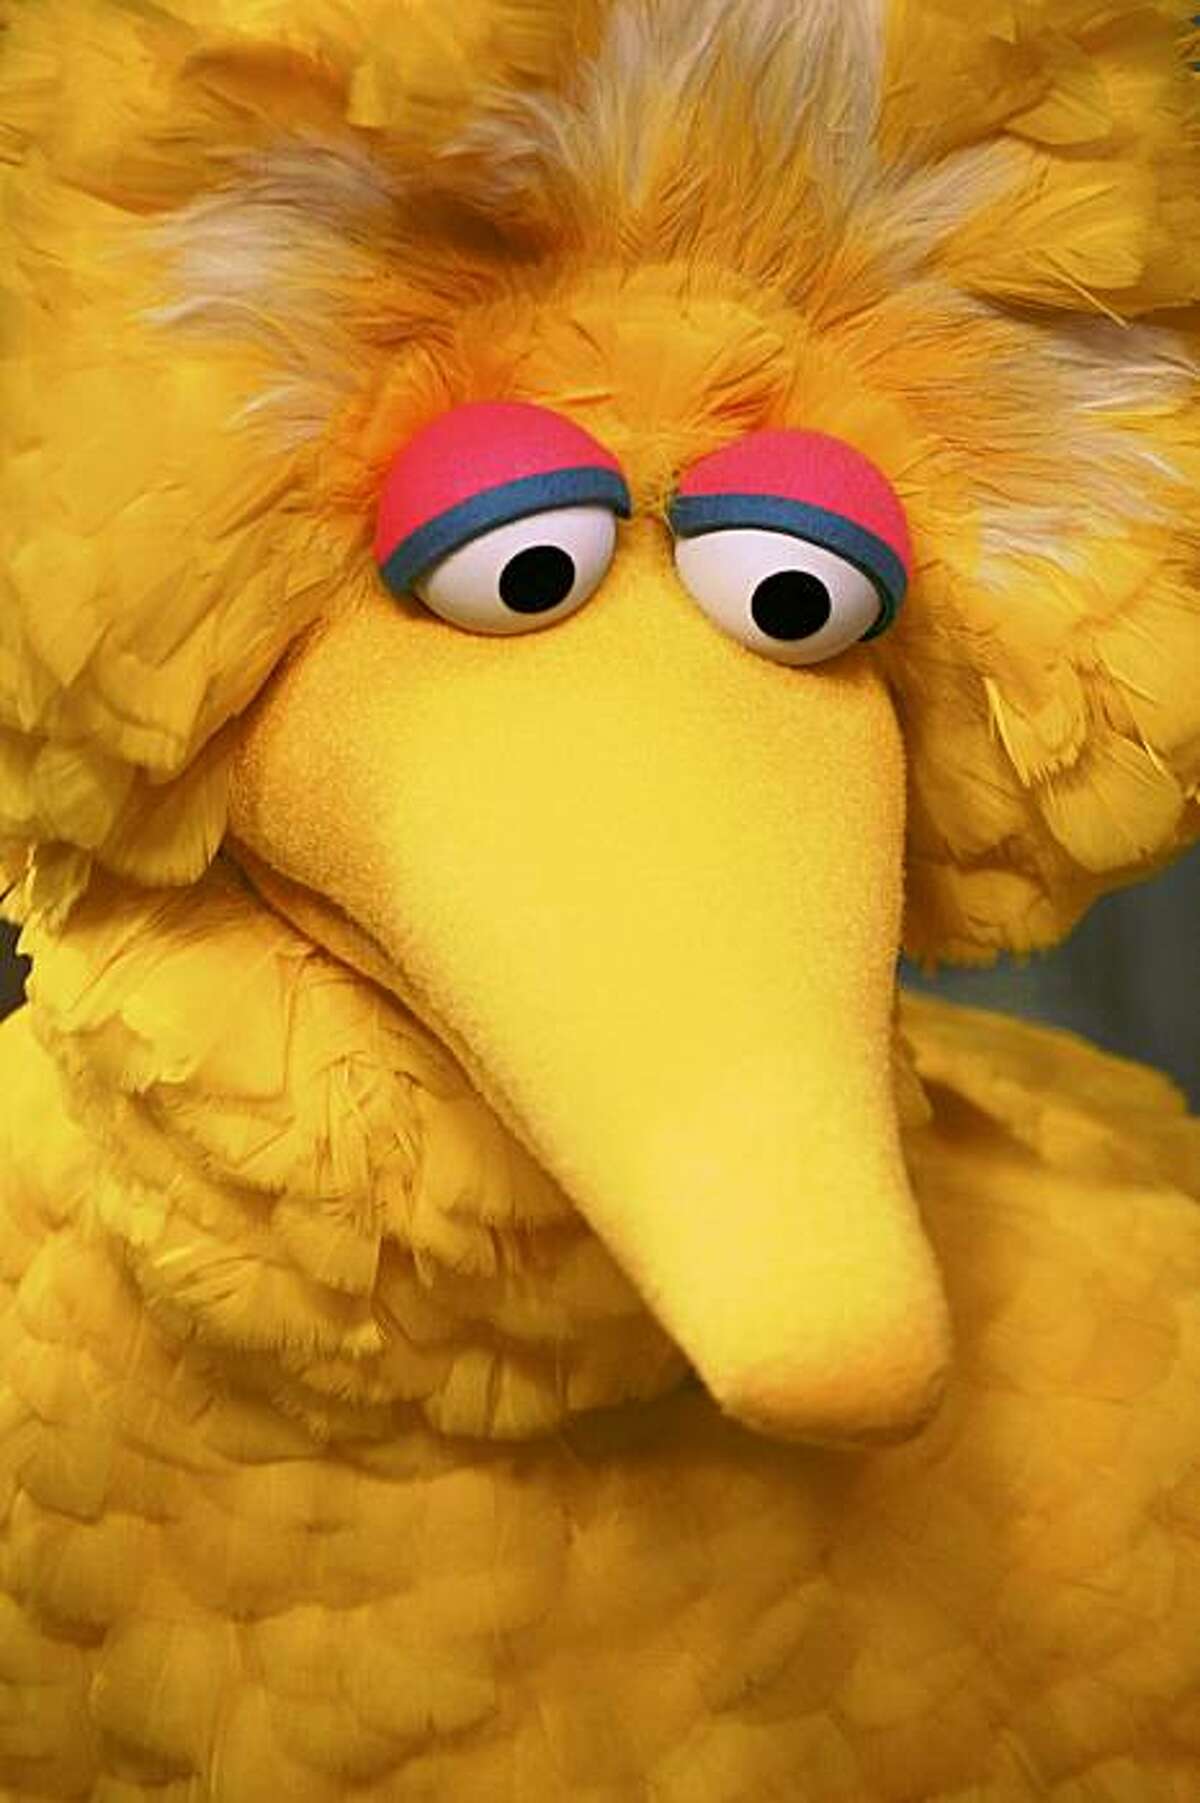 FILE - In this April 10, 2008 file photo, Big Bird is seen during the taping of an episode of "Sesame Street" in New York. (AP Photo/Mark Lennihan, file)